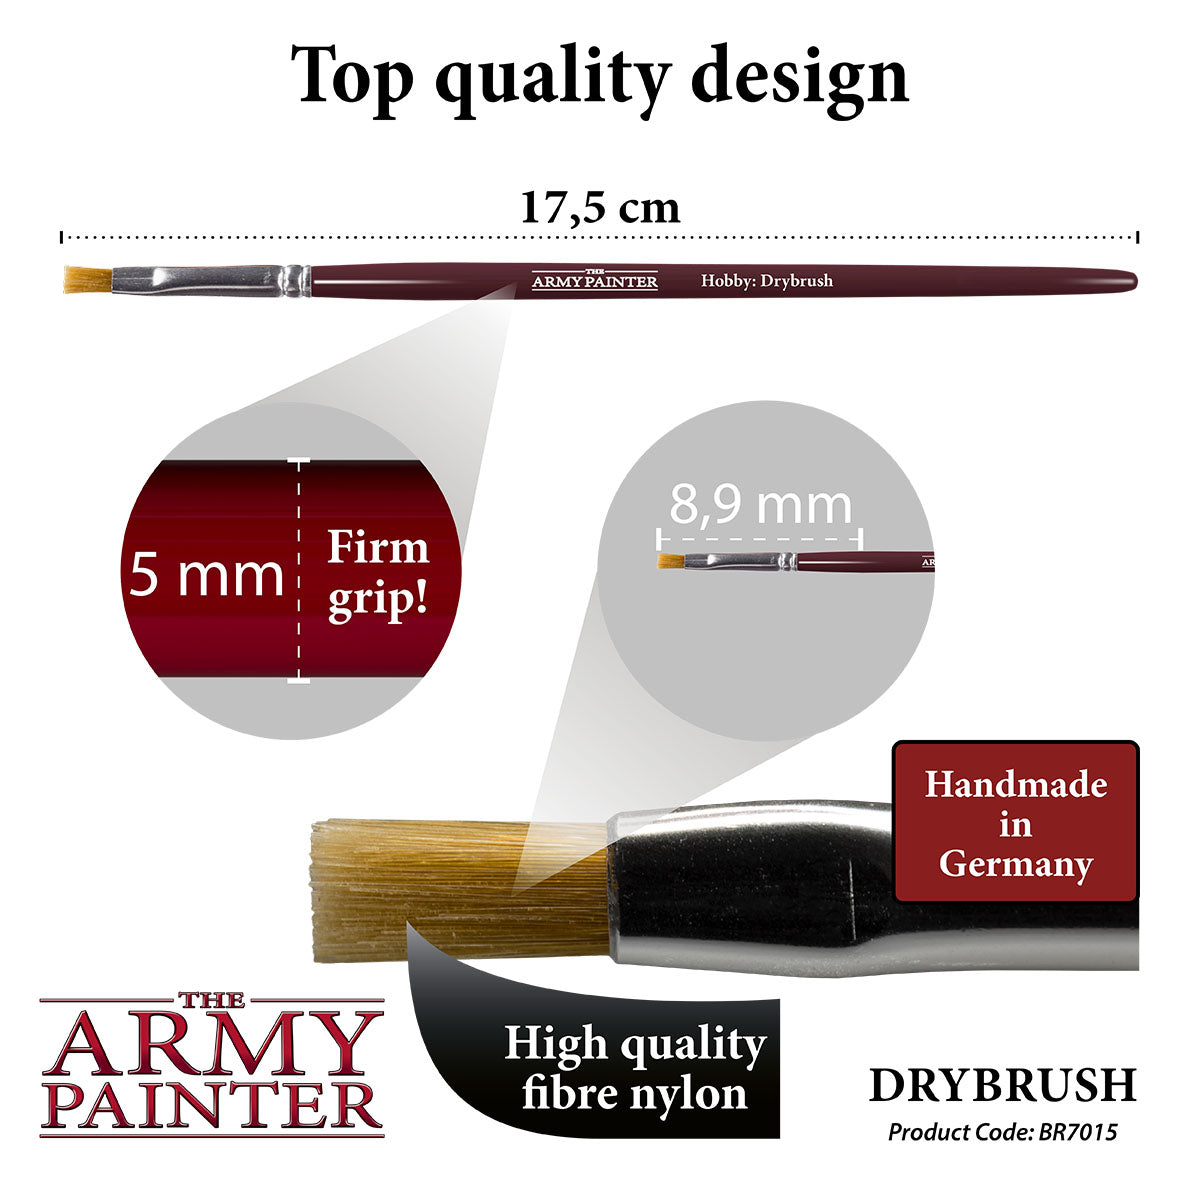 Masterclass Drybrush Set - Accessories and Supplies » The Army